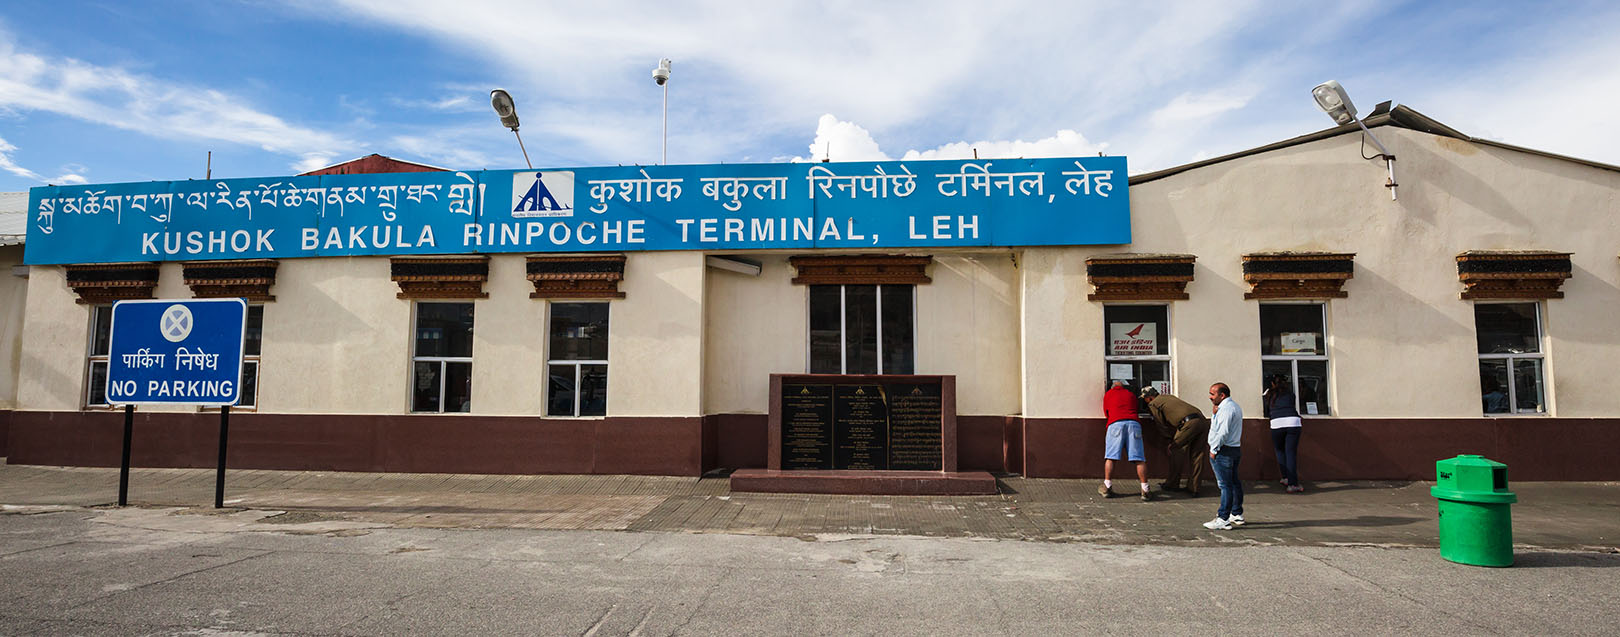 New terminal to be built at Leh airport for Rs 200 crore